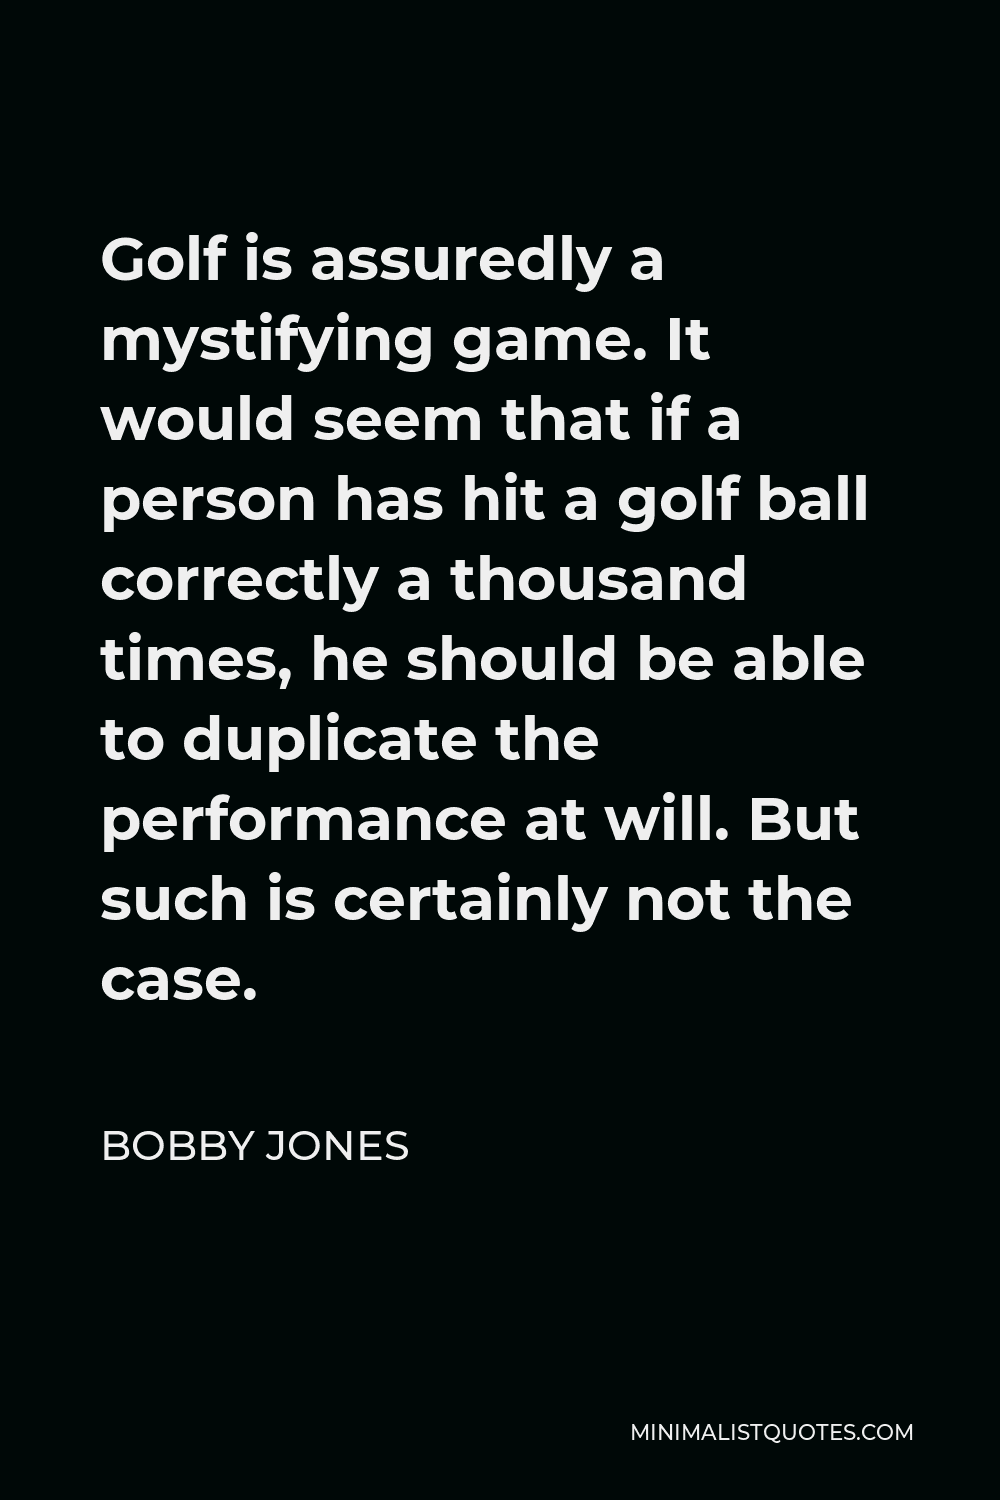 Bobby Jones Quote - Golf is assuredly a mystifying game. It would seem that if a person has hit a golf ball correctly a thousand times, he should be able to duplicate the performance at will. But such is certainly not the case.